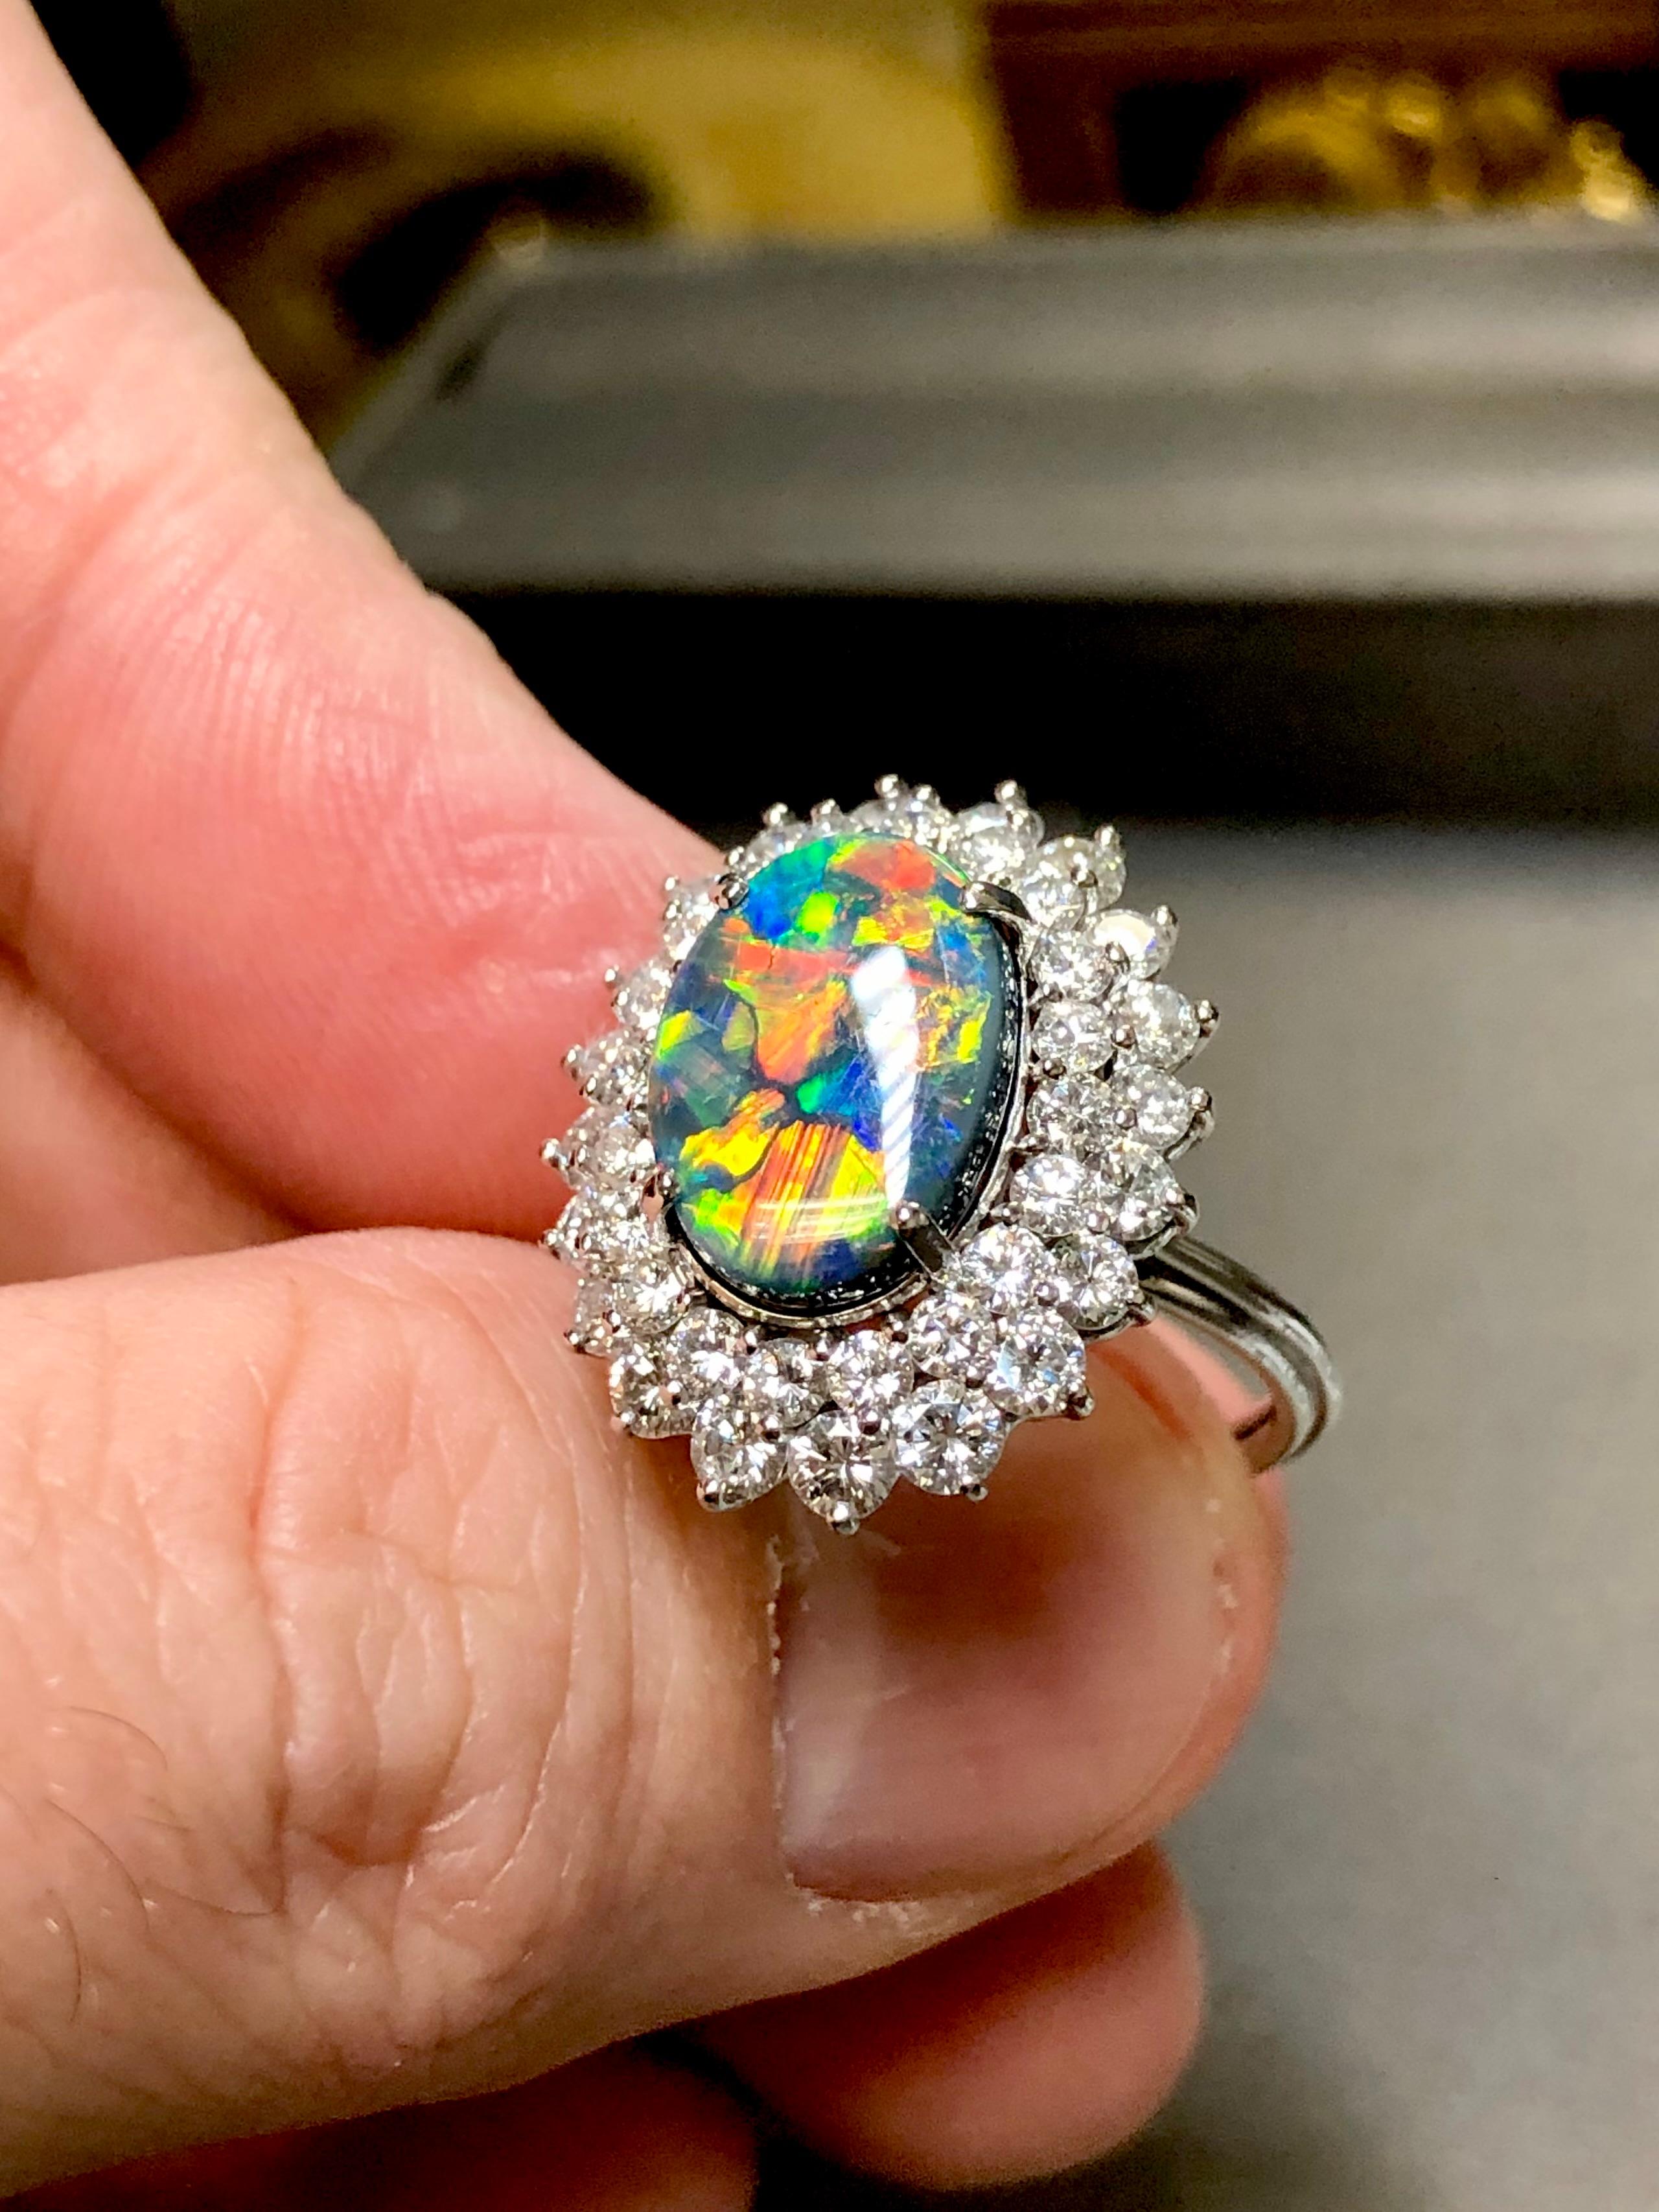 
By far not only the most impressive harlequin black opal we have ever owned, but also that we have ever seen. It possesses the best play of color with the most reds and oranges and in the largest patches without any blank spots in the material. We